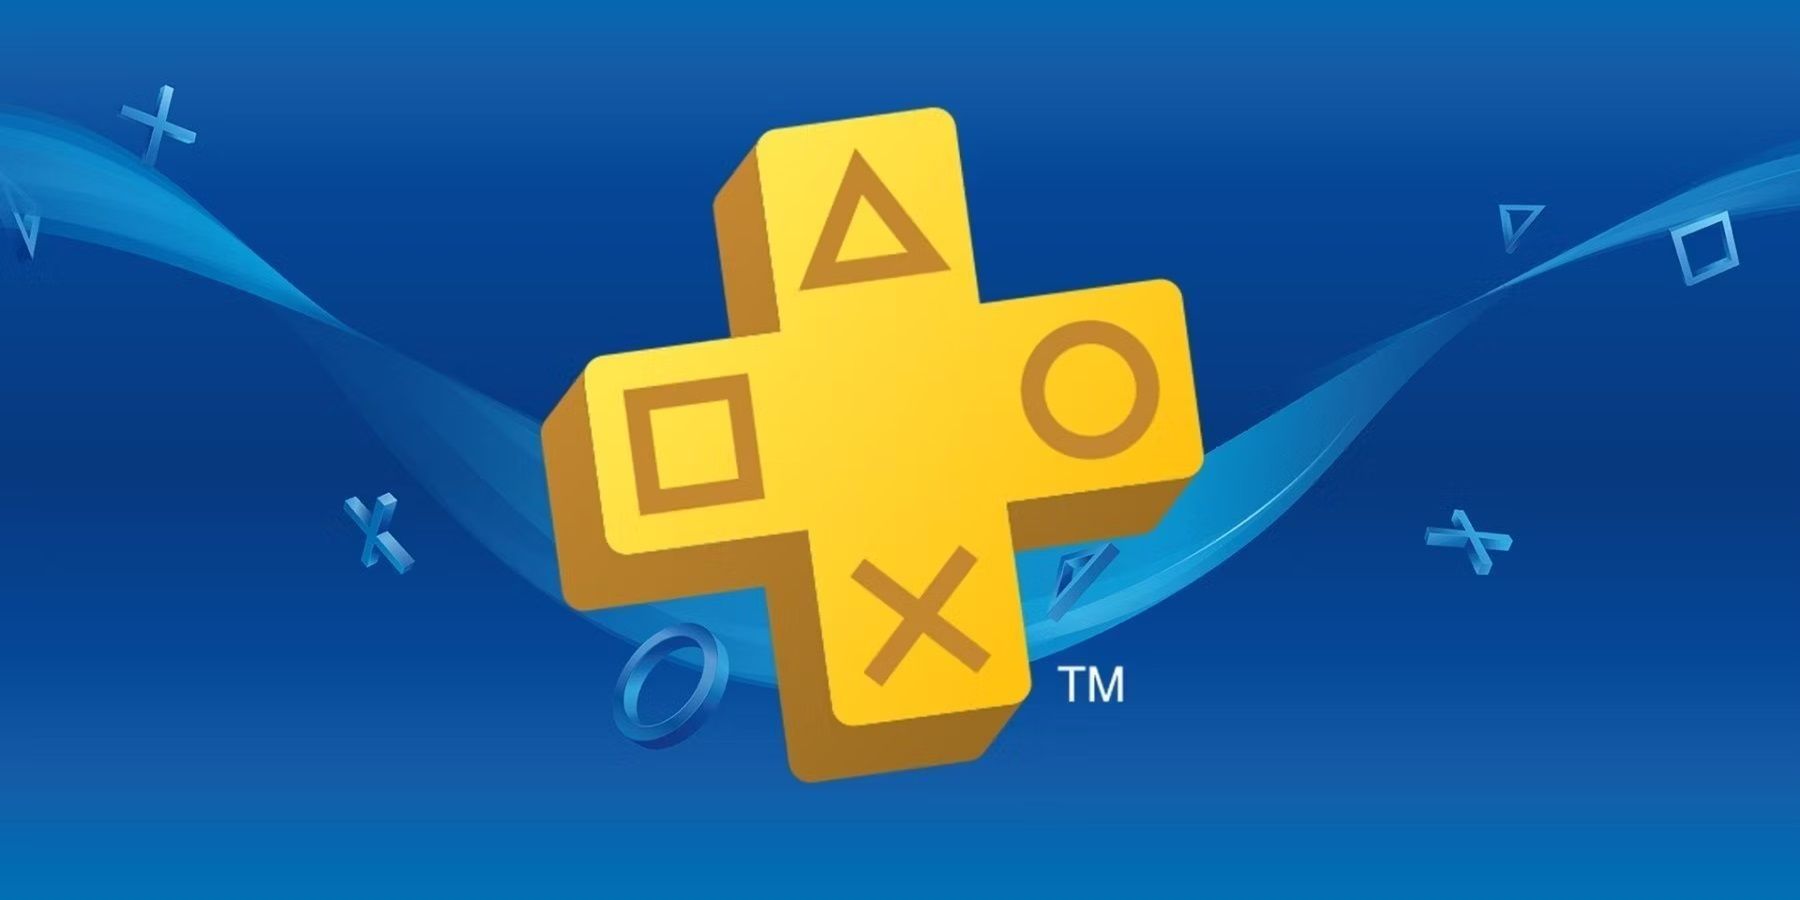 playstation plus logo with blue background